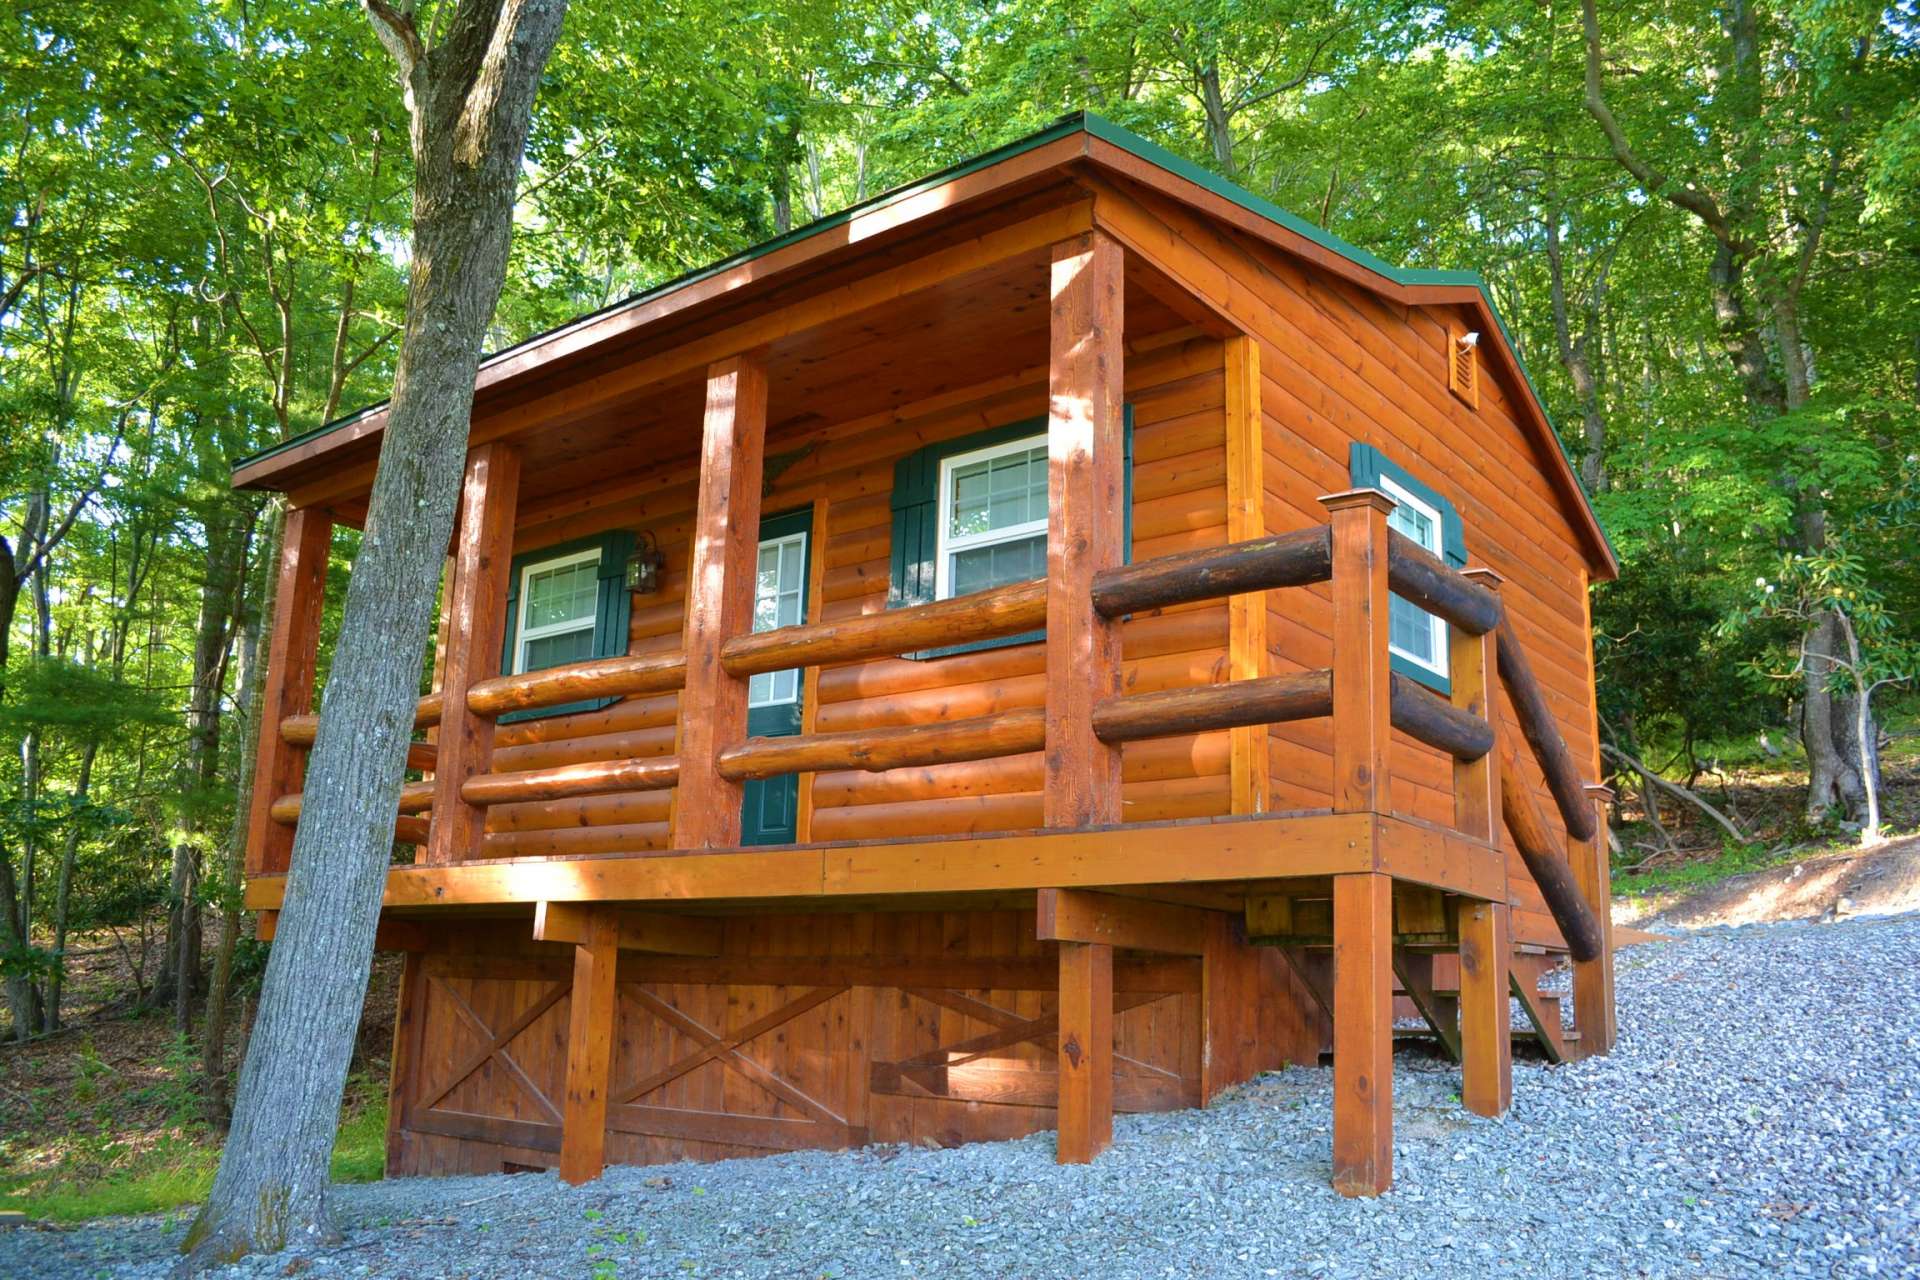 A small matching cabin/outbuilding offers an option for studio, storage, or finish out for guest cabin.